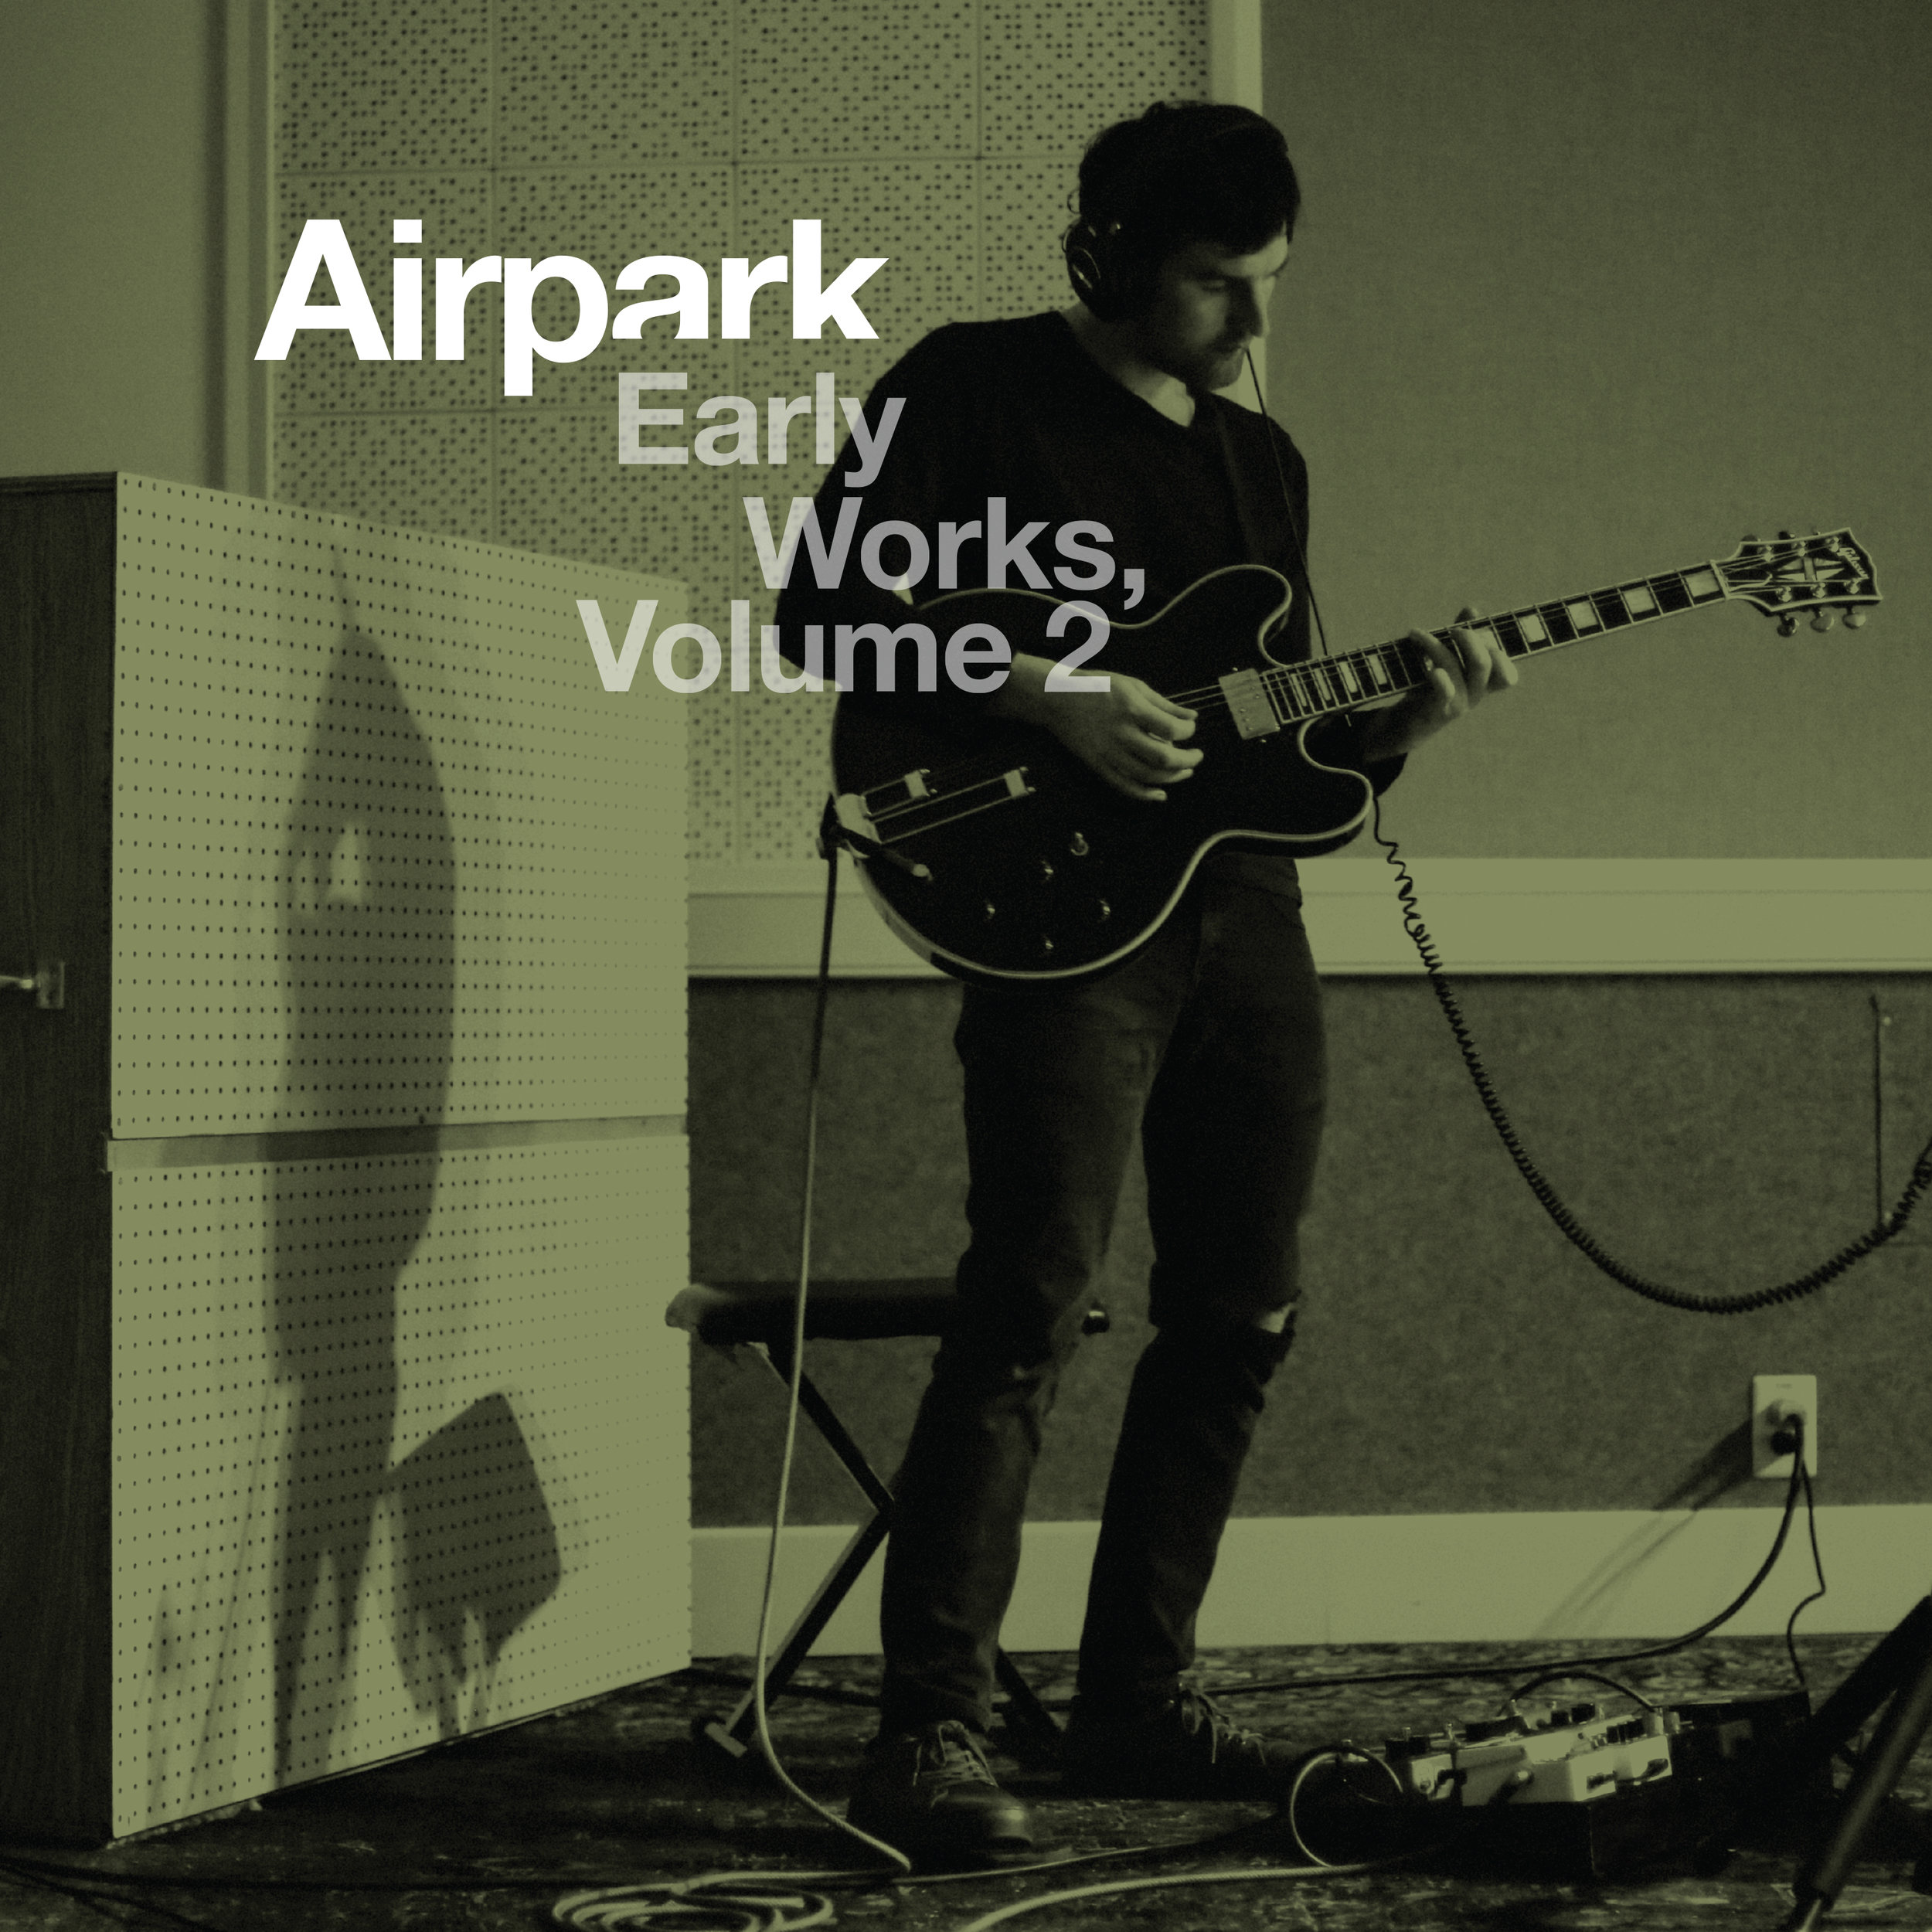 Airpark - Cover Art - Early Works, Volume 2 - EP.jpg